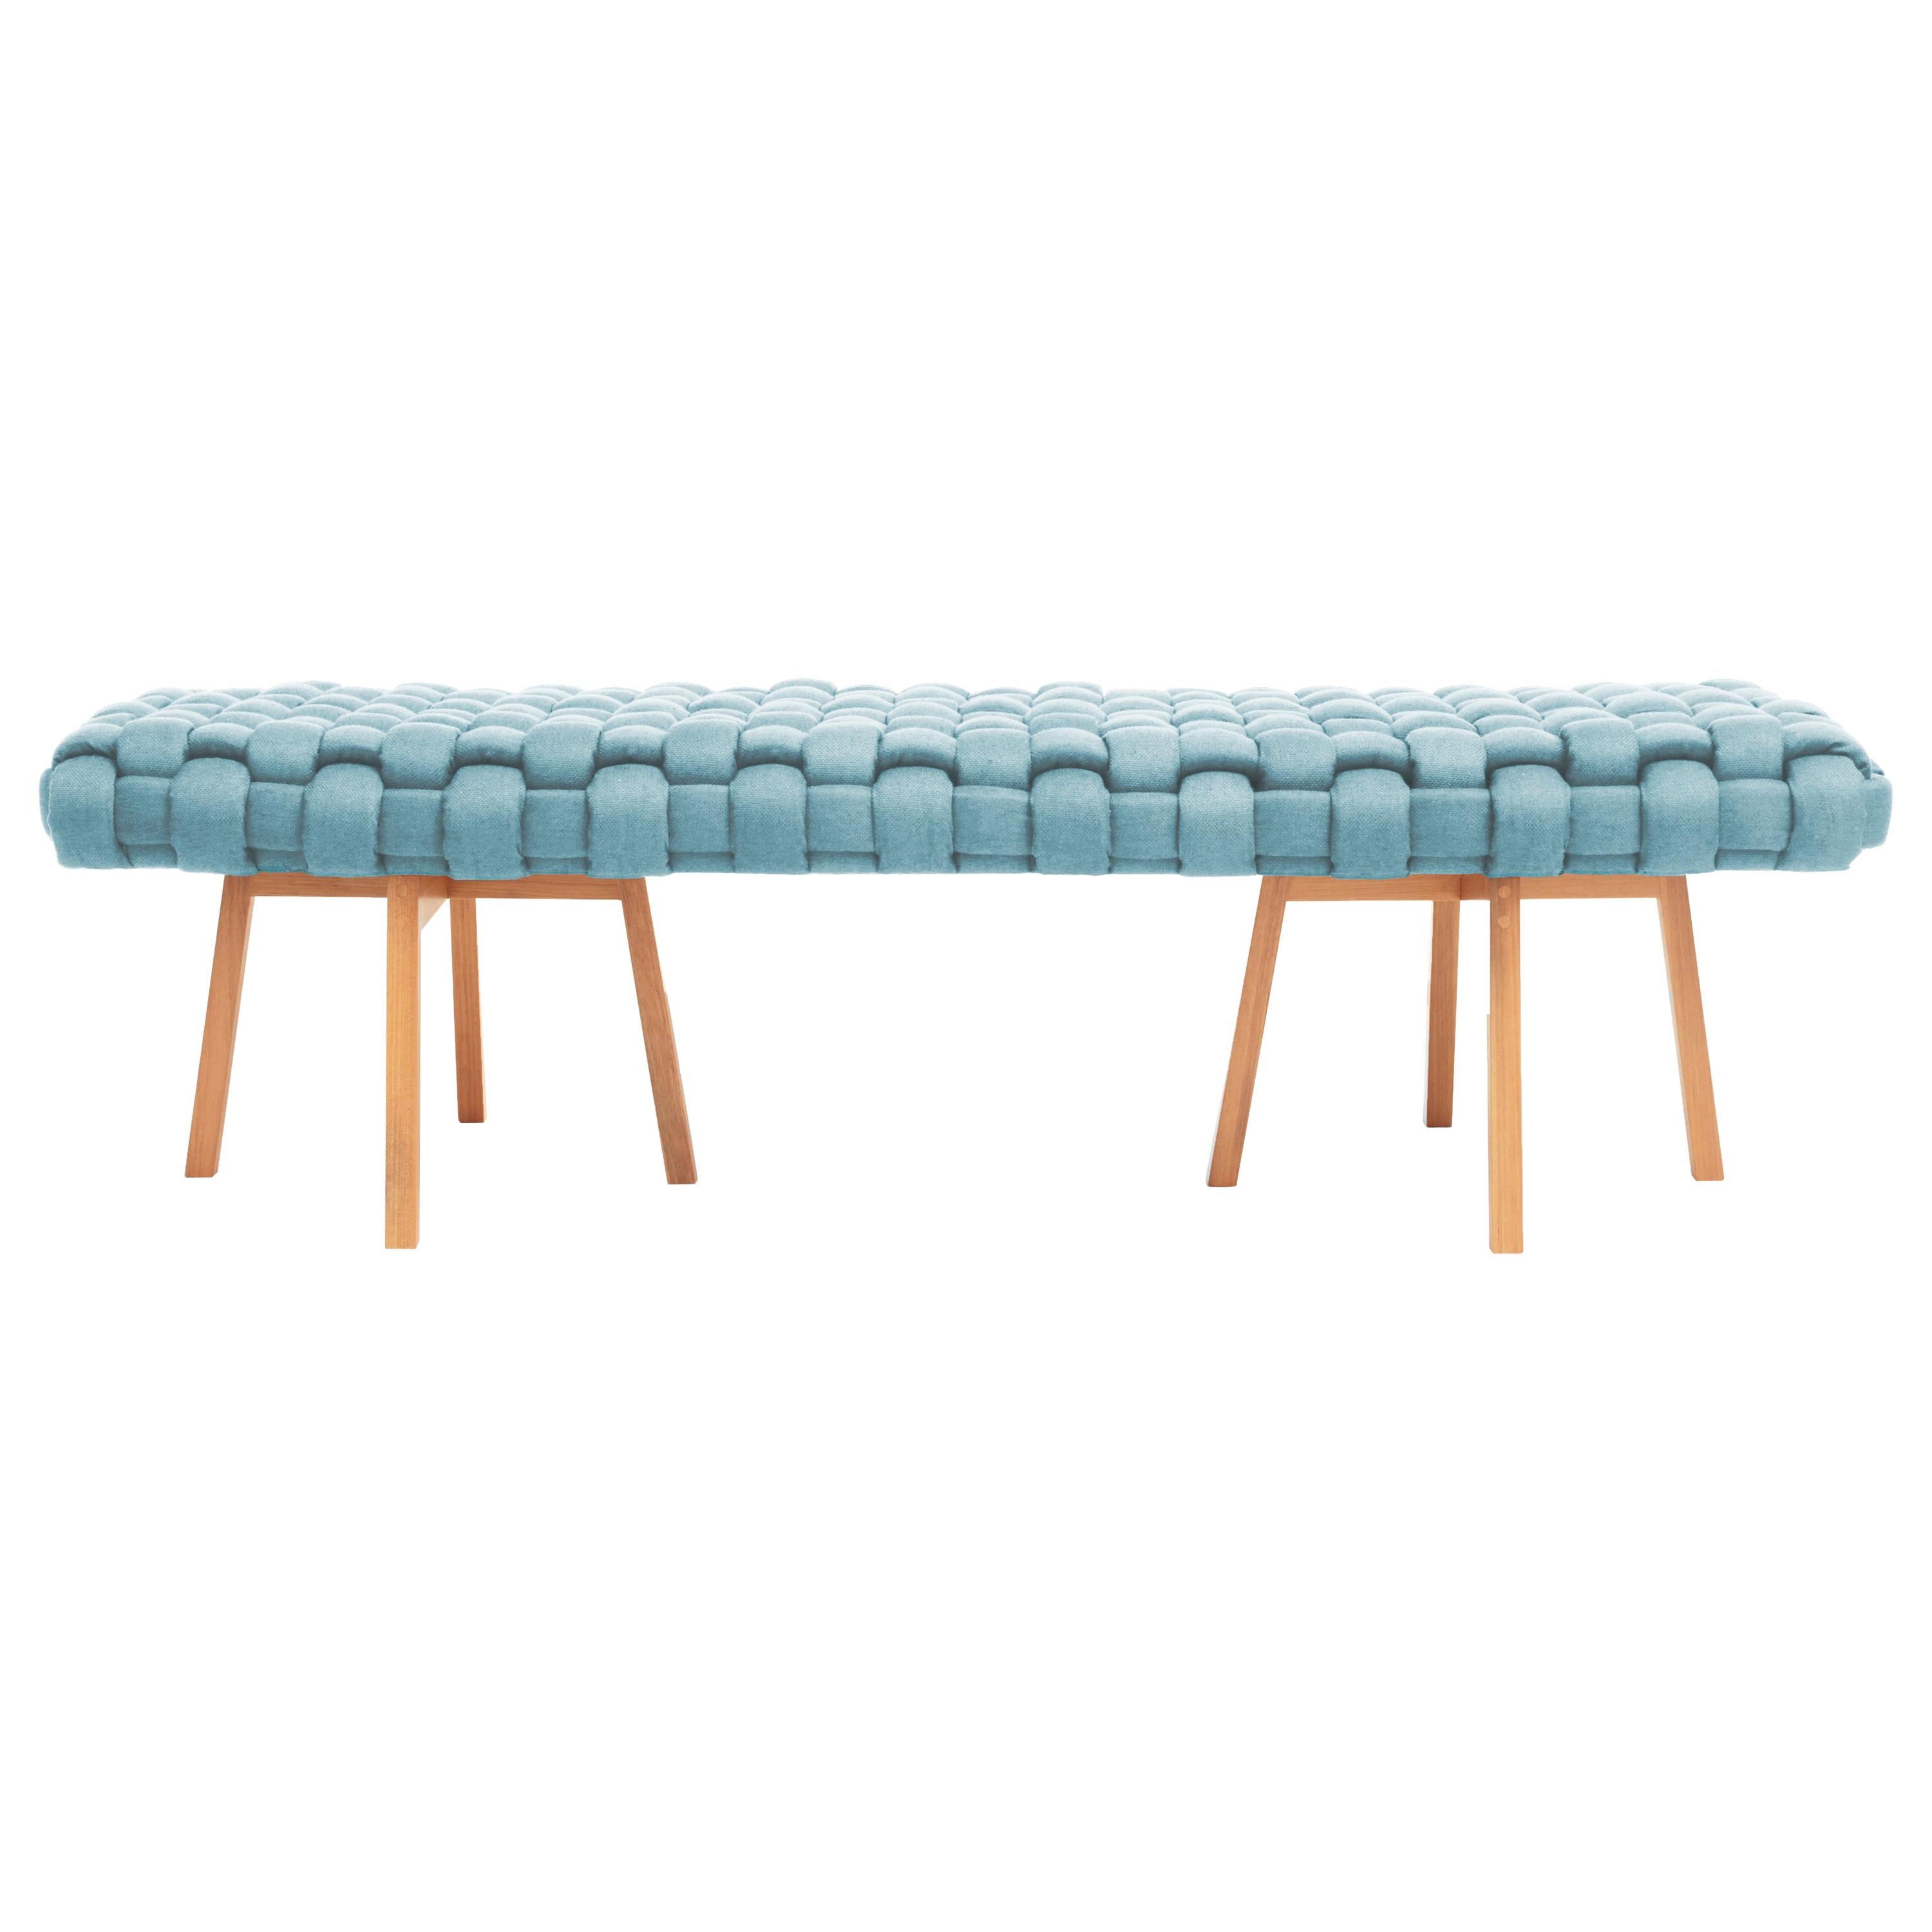 Contemporary Wood Bench, Handwoven Upholstery, the "Trama", Blue